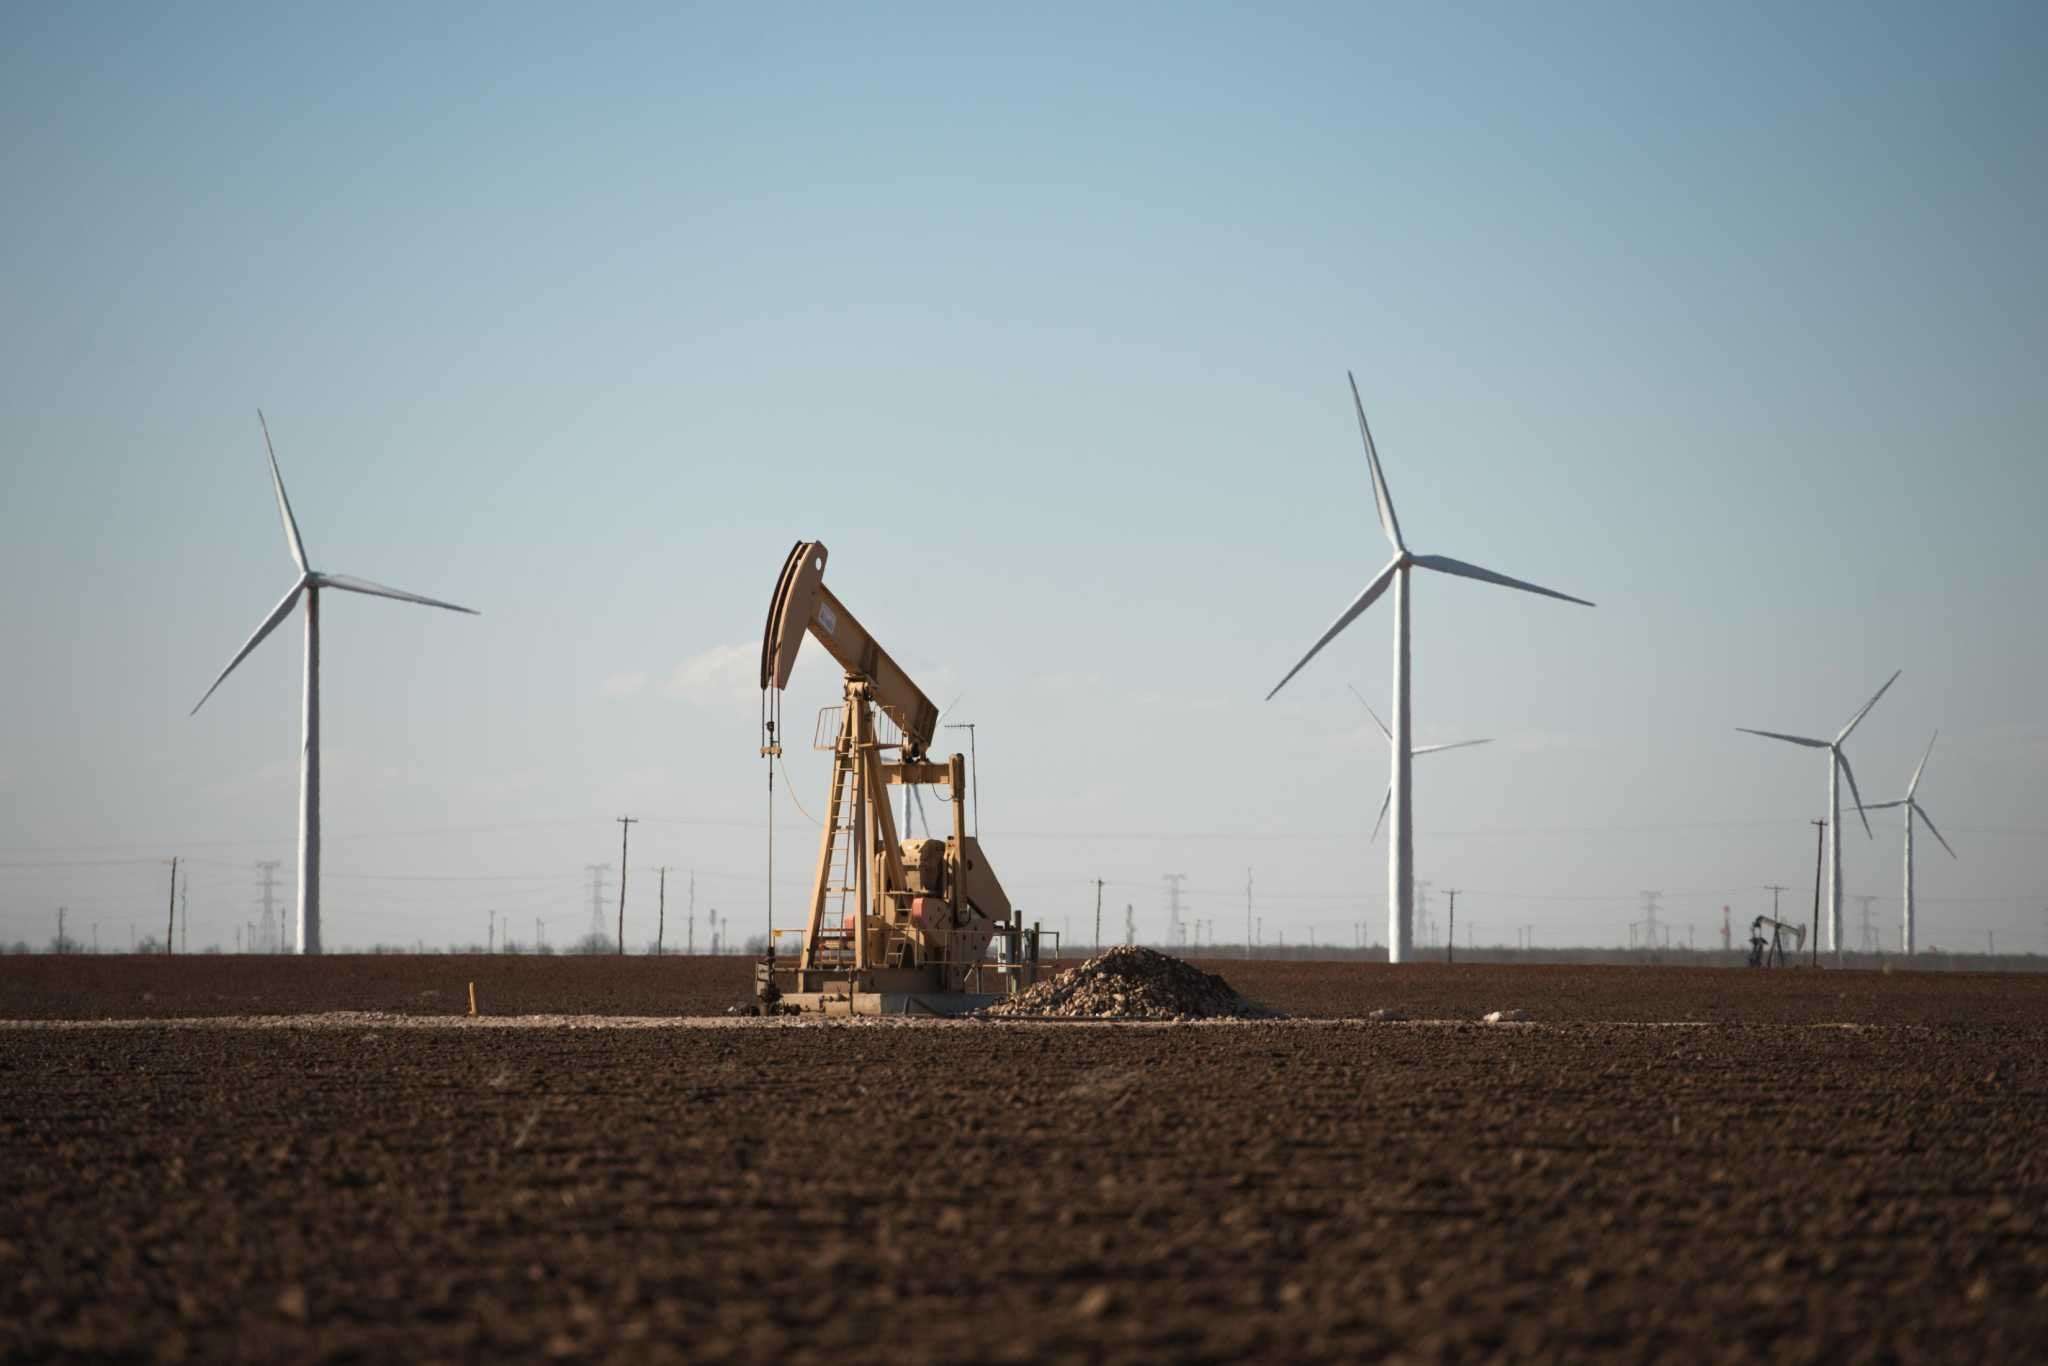 image for 60 percent of voters support transitioning away from oil, poll says